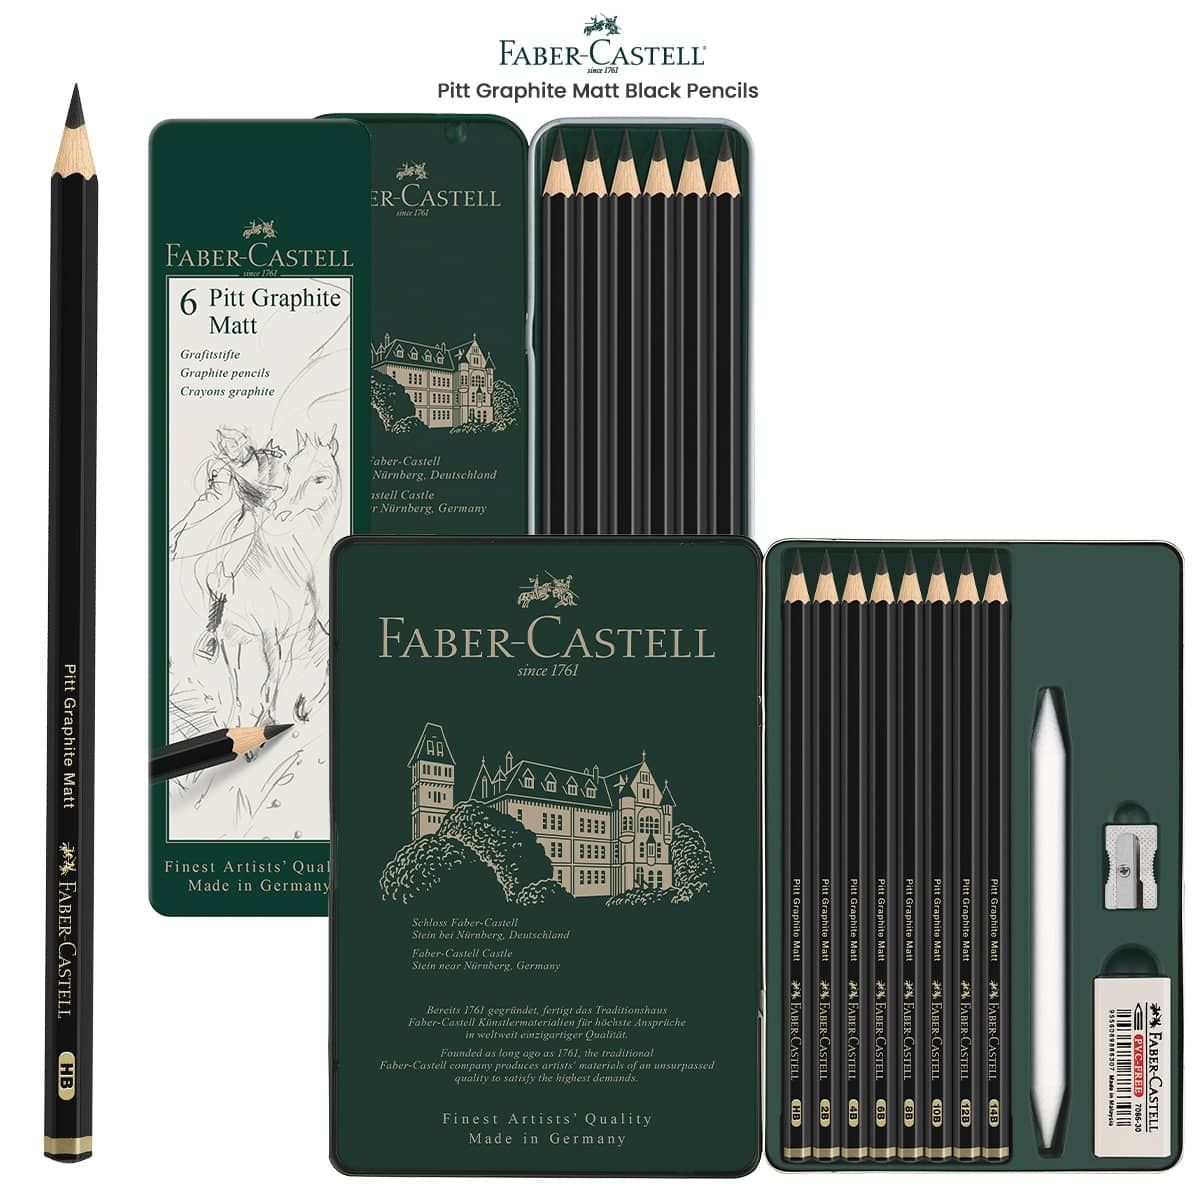 Faber-Castell Pencils, Castell 9000 Artist graphite pencils, 4B black lead  Pencil for drawing, sketch, shading - box of 12